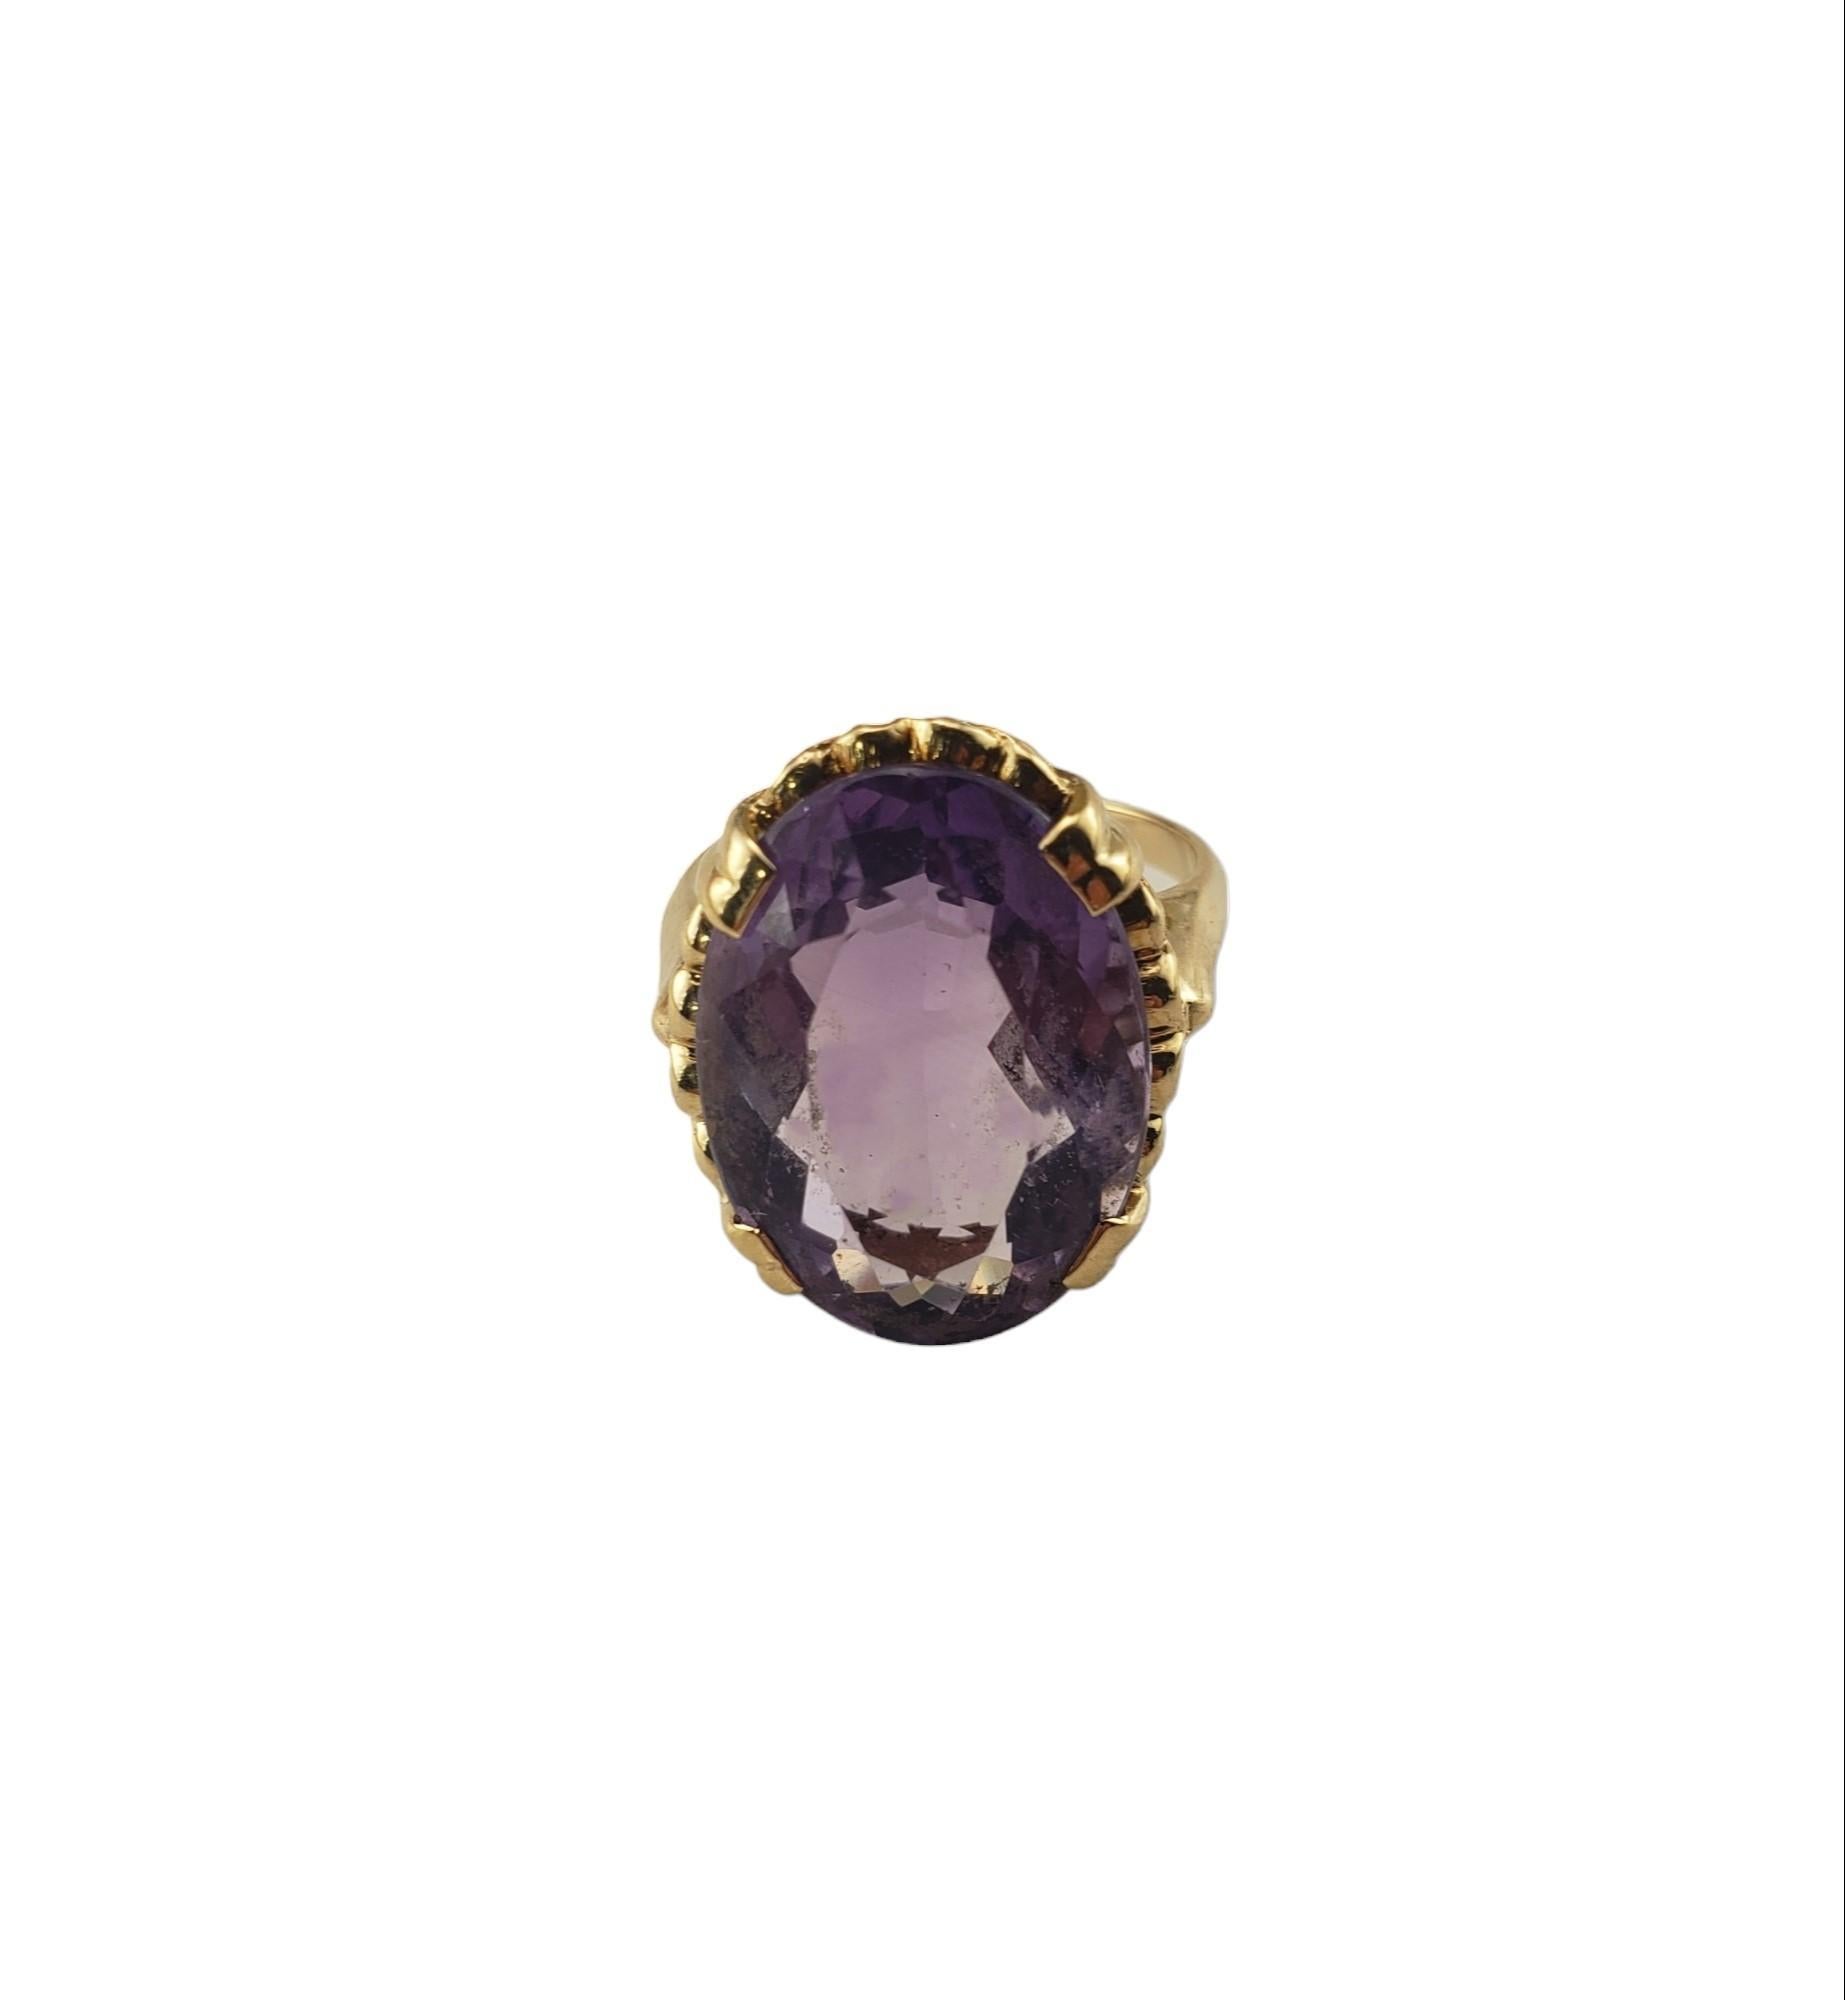 Vintage 14K Yellow Gold Amethyst Ring Size 6.75 JAGi Certified-

This elegant ring features one oval cut amethyst (17.8 mm x 13.1 mm)set in beautifully detailed 14K yellow gold.  Width:  19.8 mm.  Shank: 2.2 mm.

Amethyst weight:  10.0 ct.

Ring